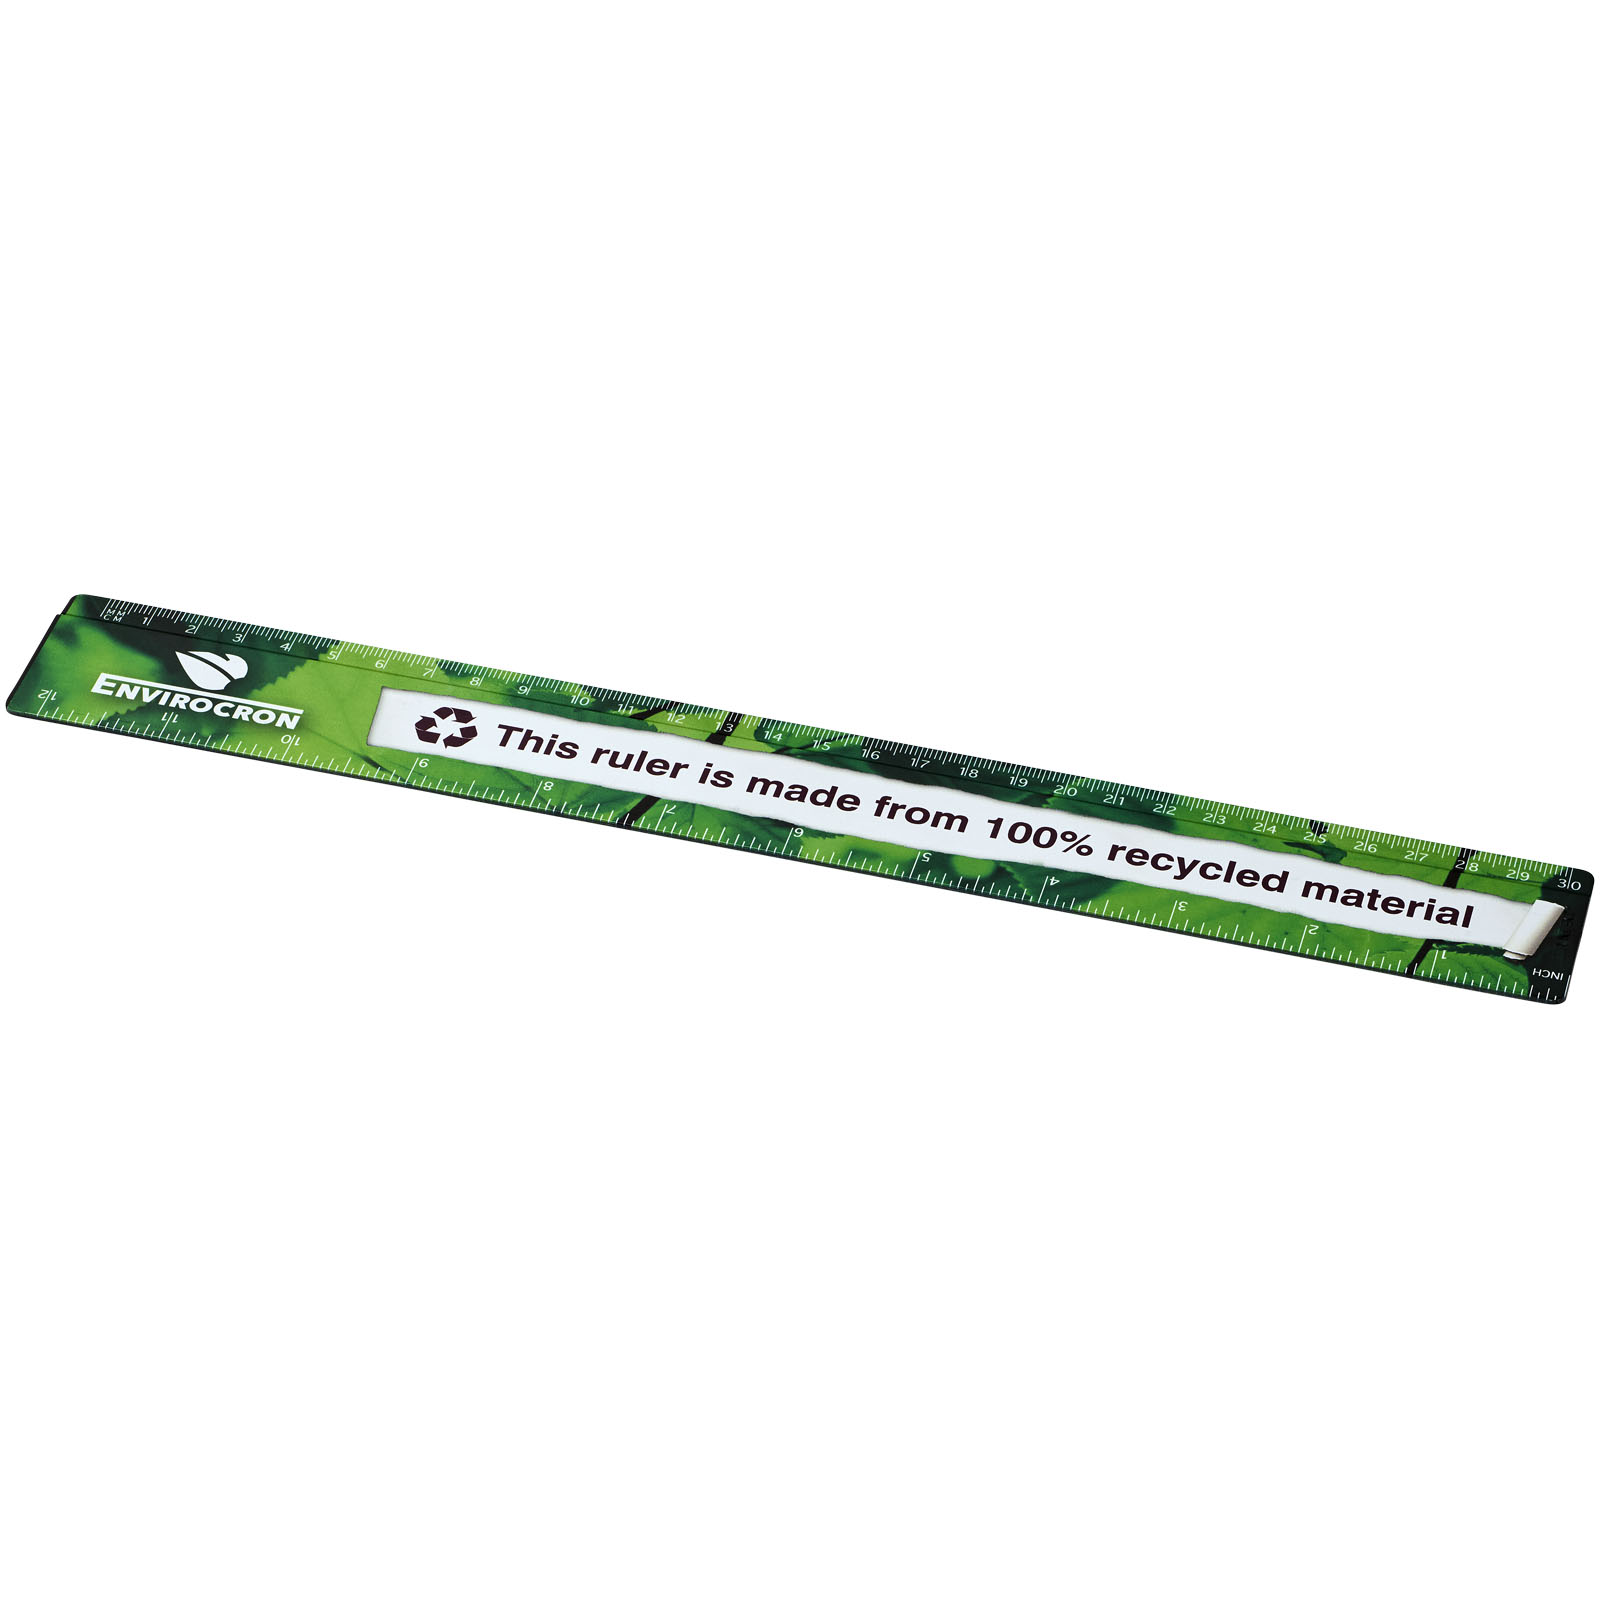 Advertising Desk Accessories - Terran 30 cm ruler from 100% recycled plastic - 0